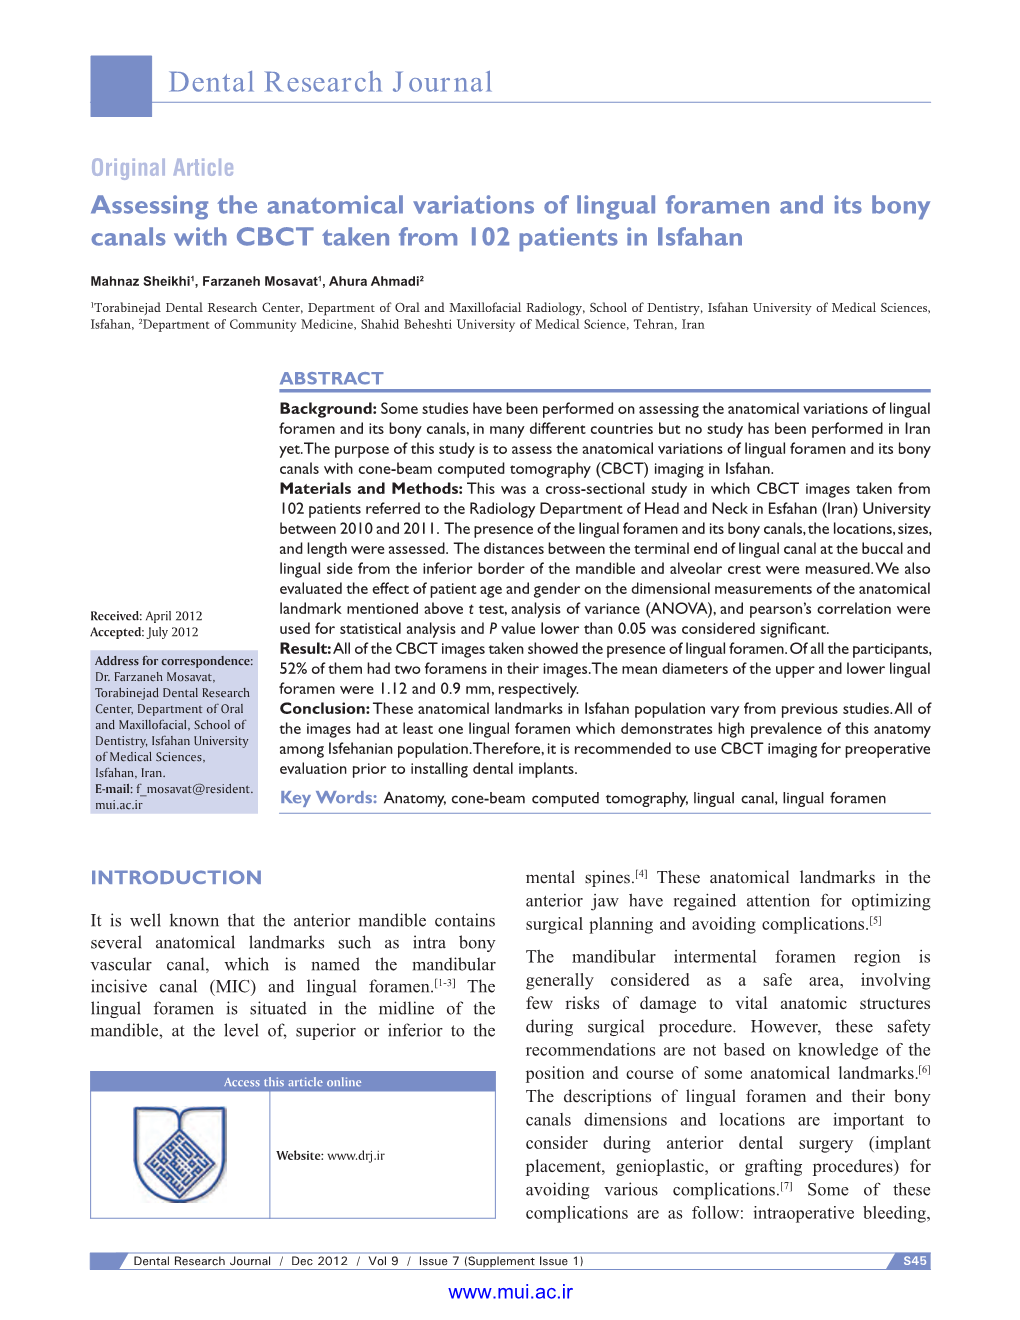 Assessing the Anatomical Variations of Lingual Foramen and Its Bony Canals with CBCT Taken from 102 Patients in Isfahan